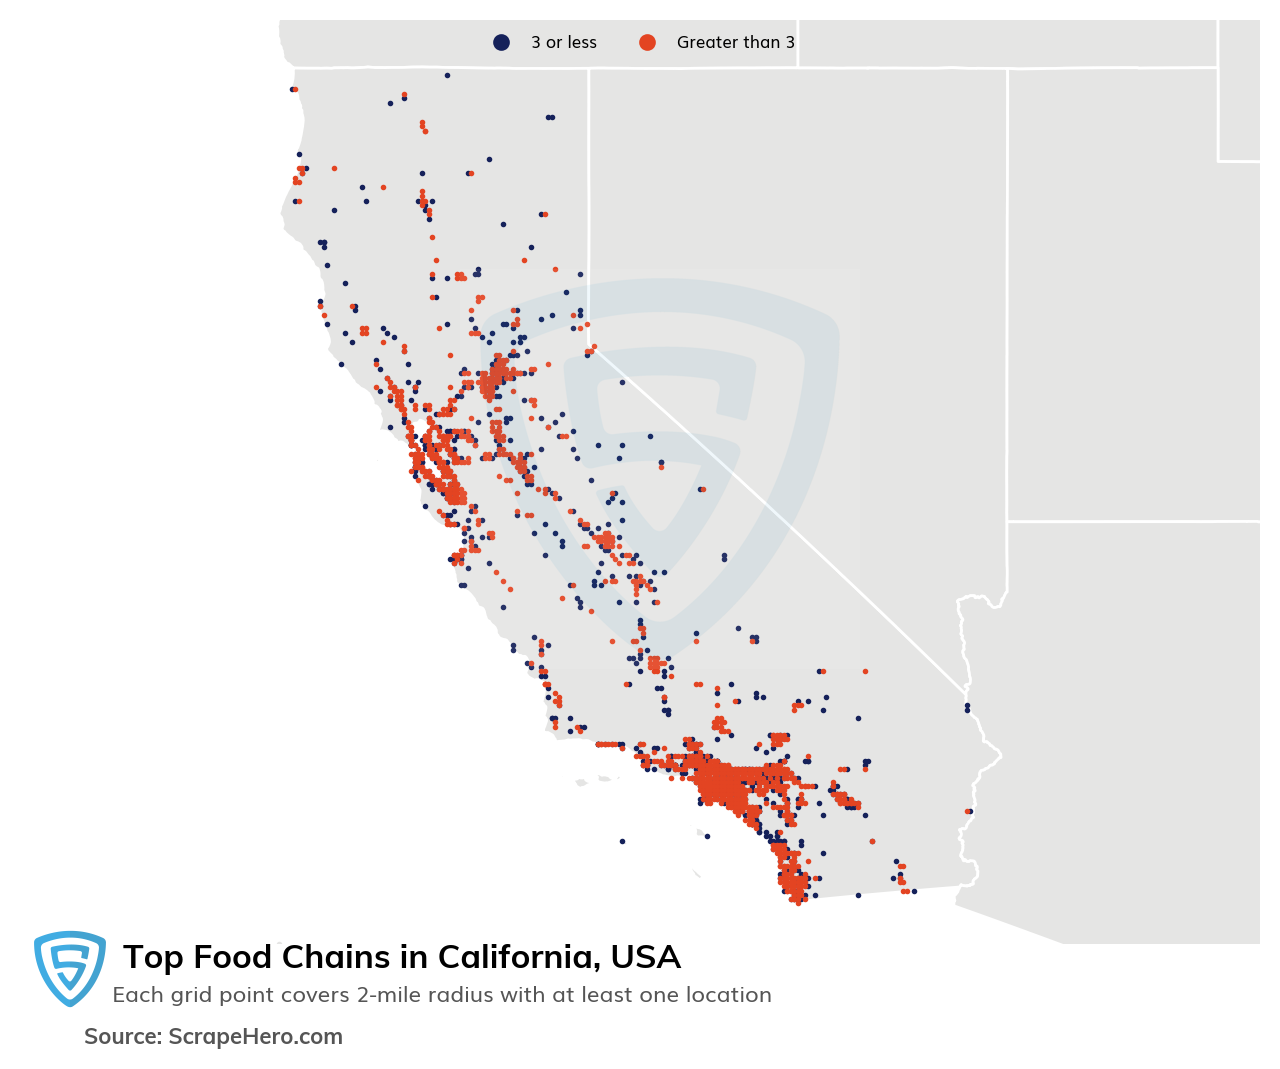 Map of 10 Largest Food Chains in California in 2021 Based on Locations